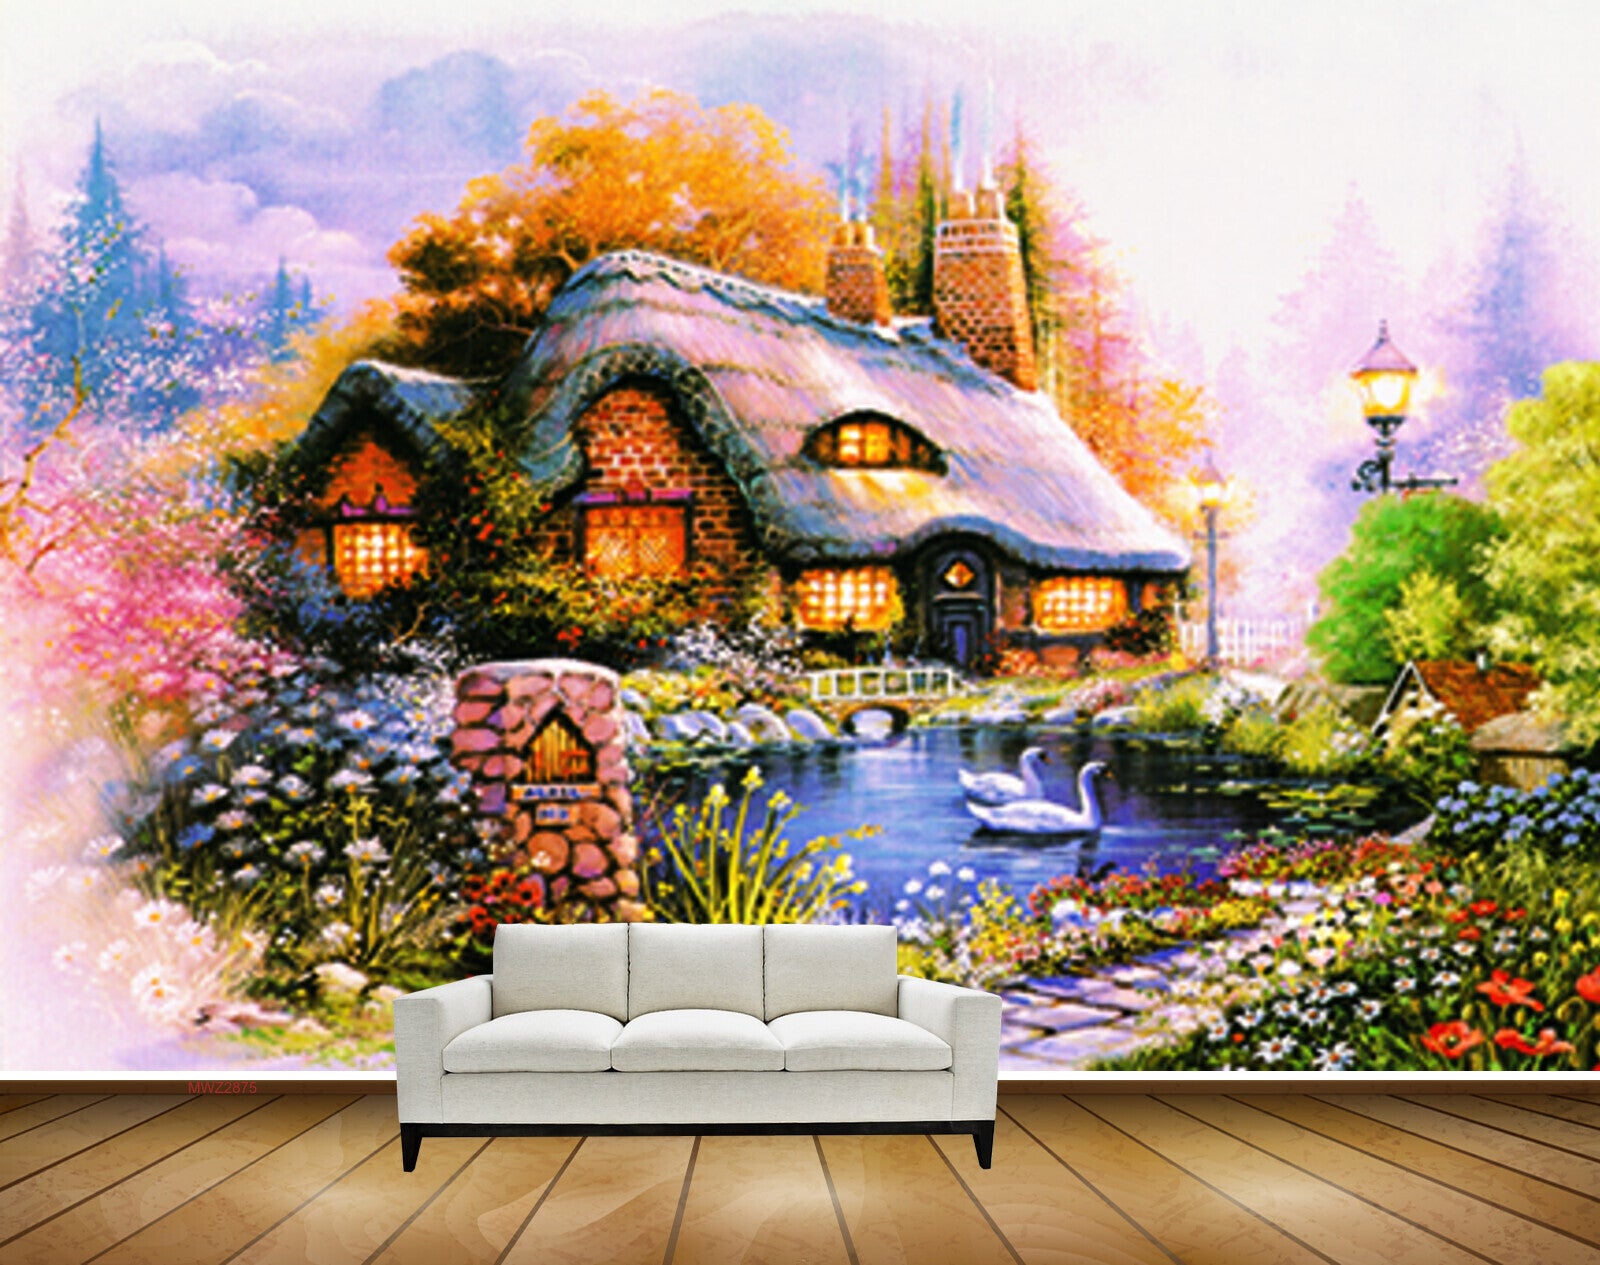 Avikalp MWZ2875 House Trees Cranes Lake Pond Water Flowers Lamp Plants Clouds Painting HD Wallpaper